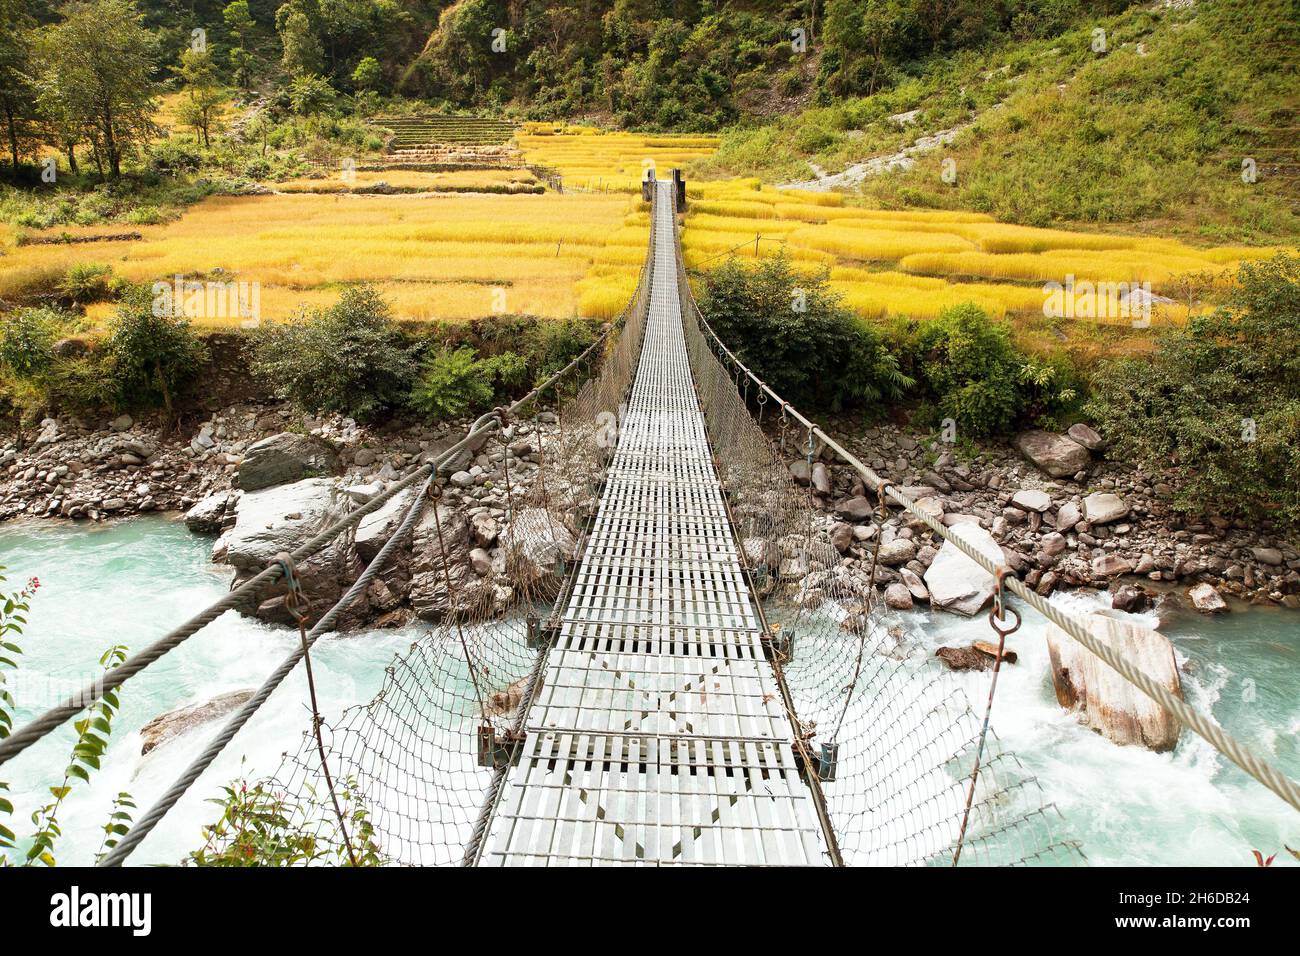 rope hanging suspension bridge and rice or paddy fields in Nepal Himalayas mountains Stock Photo